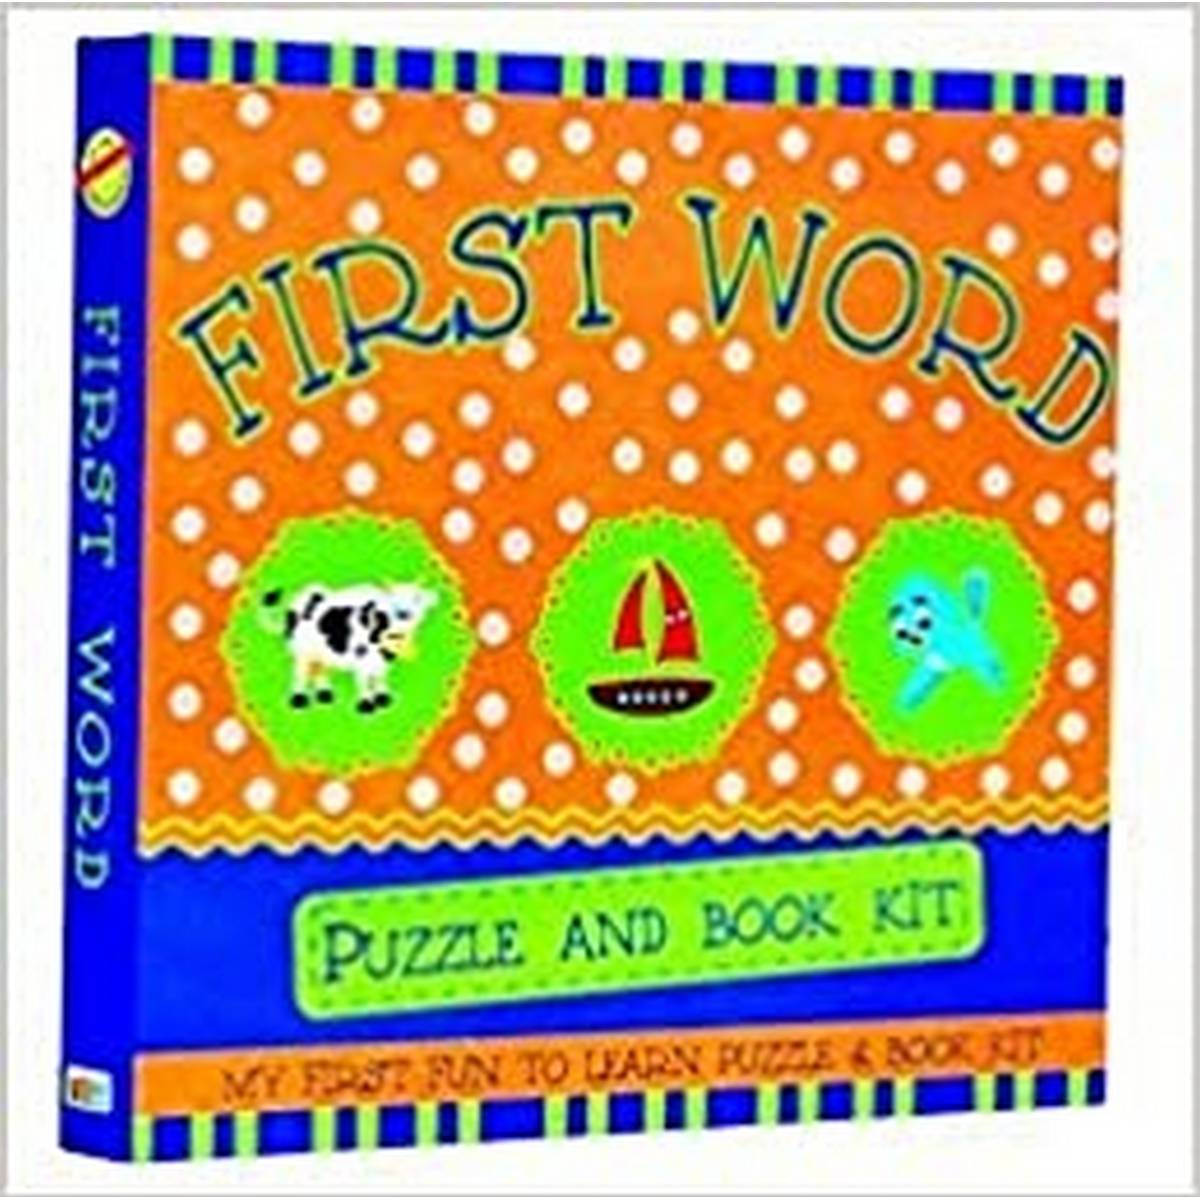 Puzzle & Book kit: first words